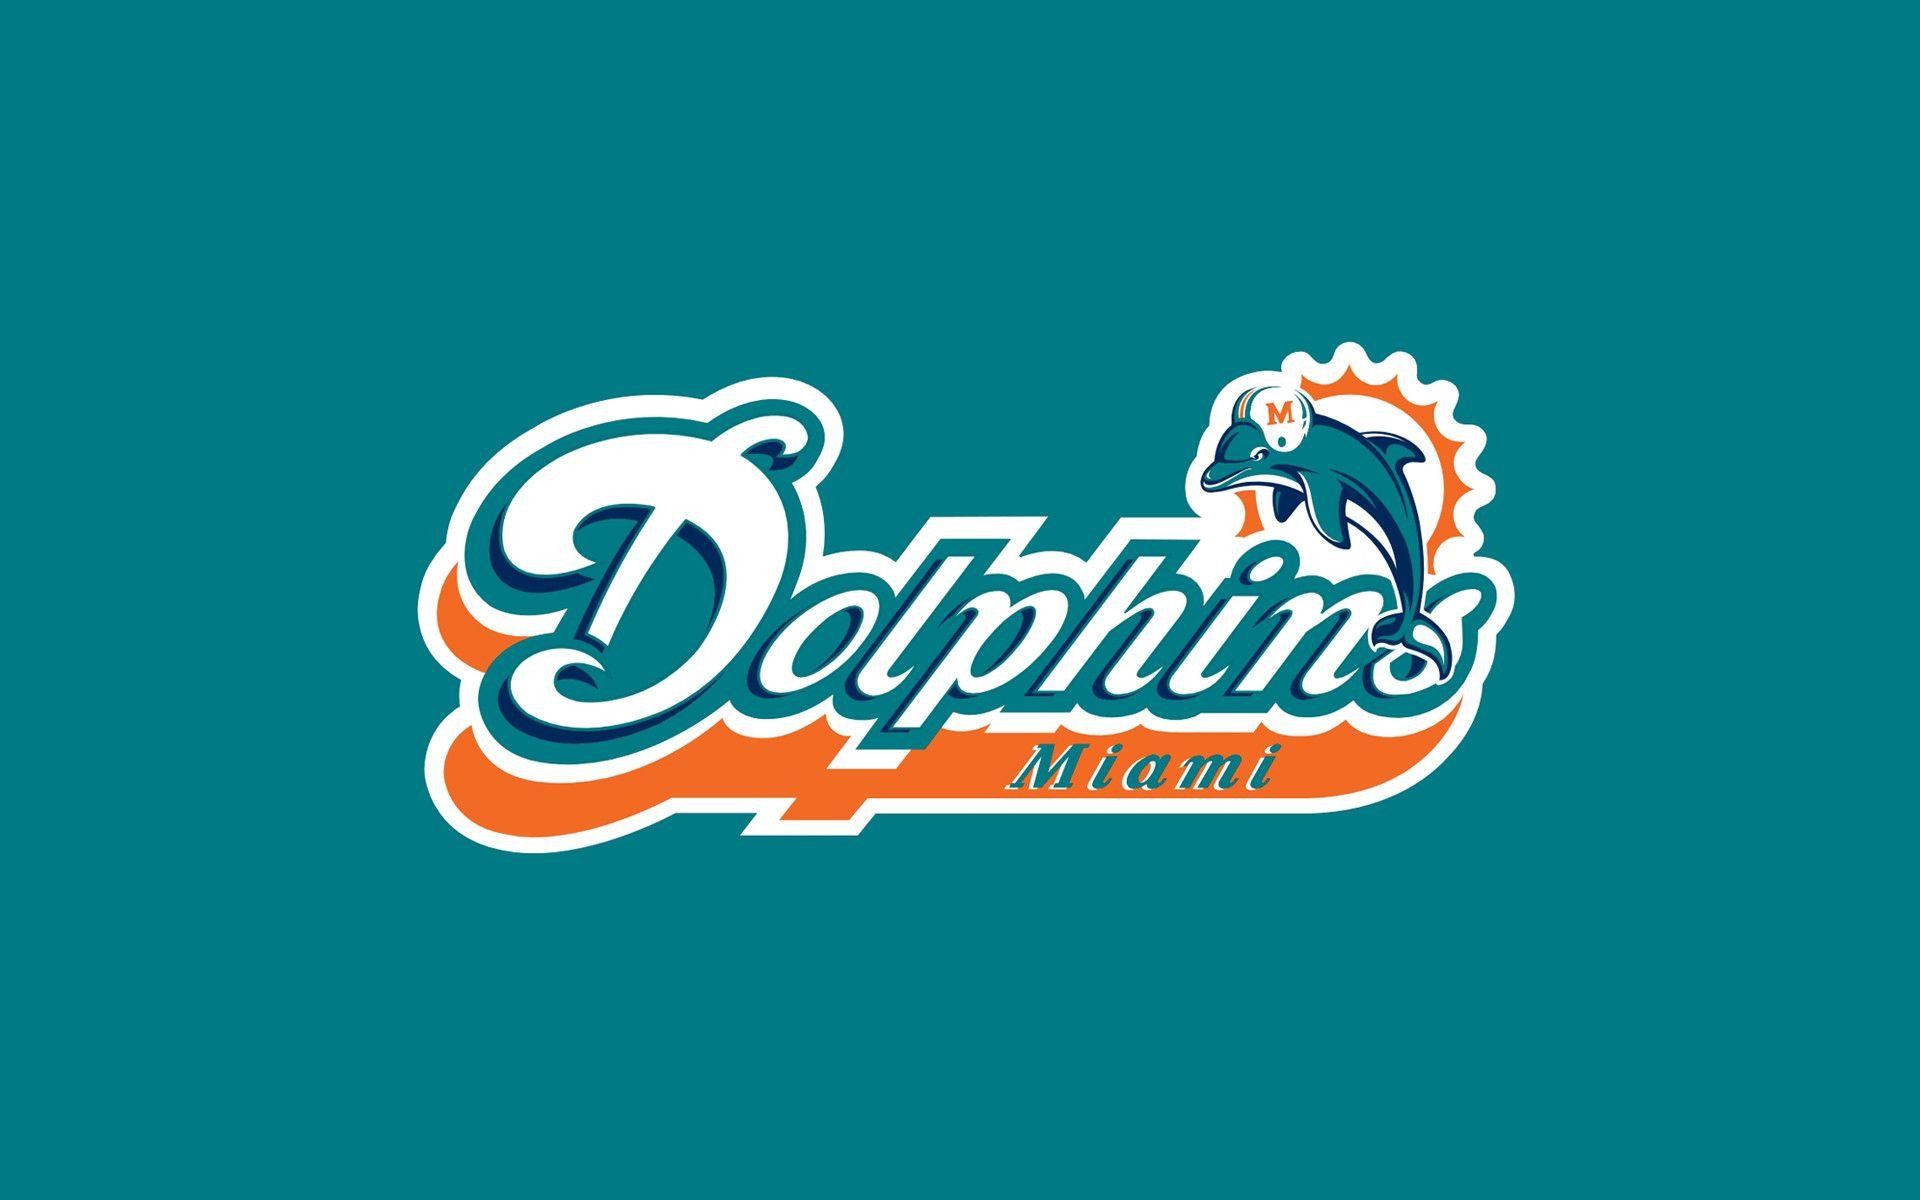 1920x1200 Miami Dolphins Wallpapers - Full HD wallpaper search